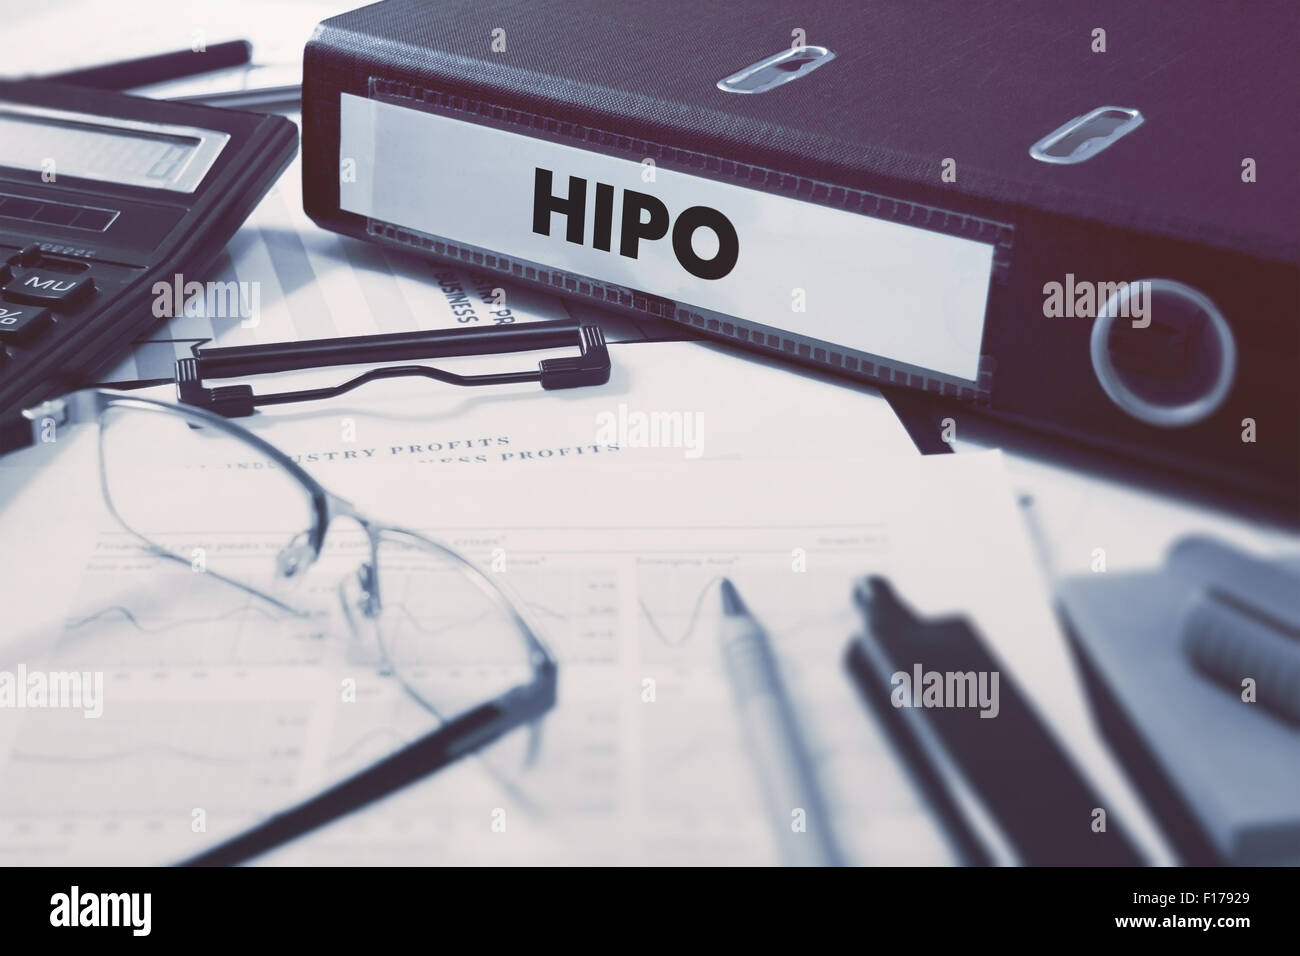 Ring Binder with inscription HiPo - High Potential - on Background of Working Table with Office Supplies, Glasses, Reports. Tone Stock Photo